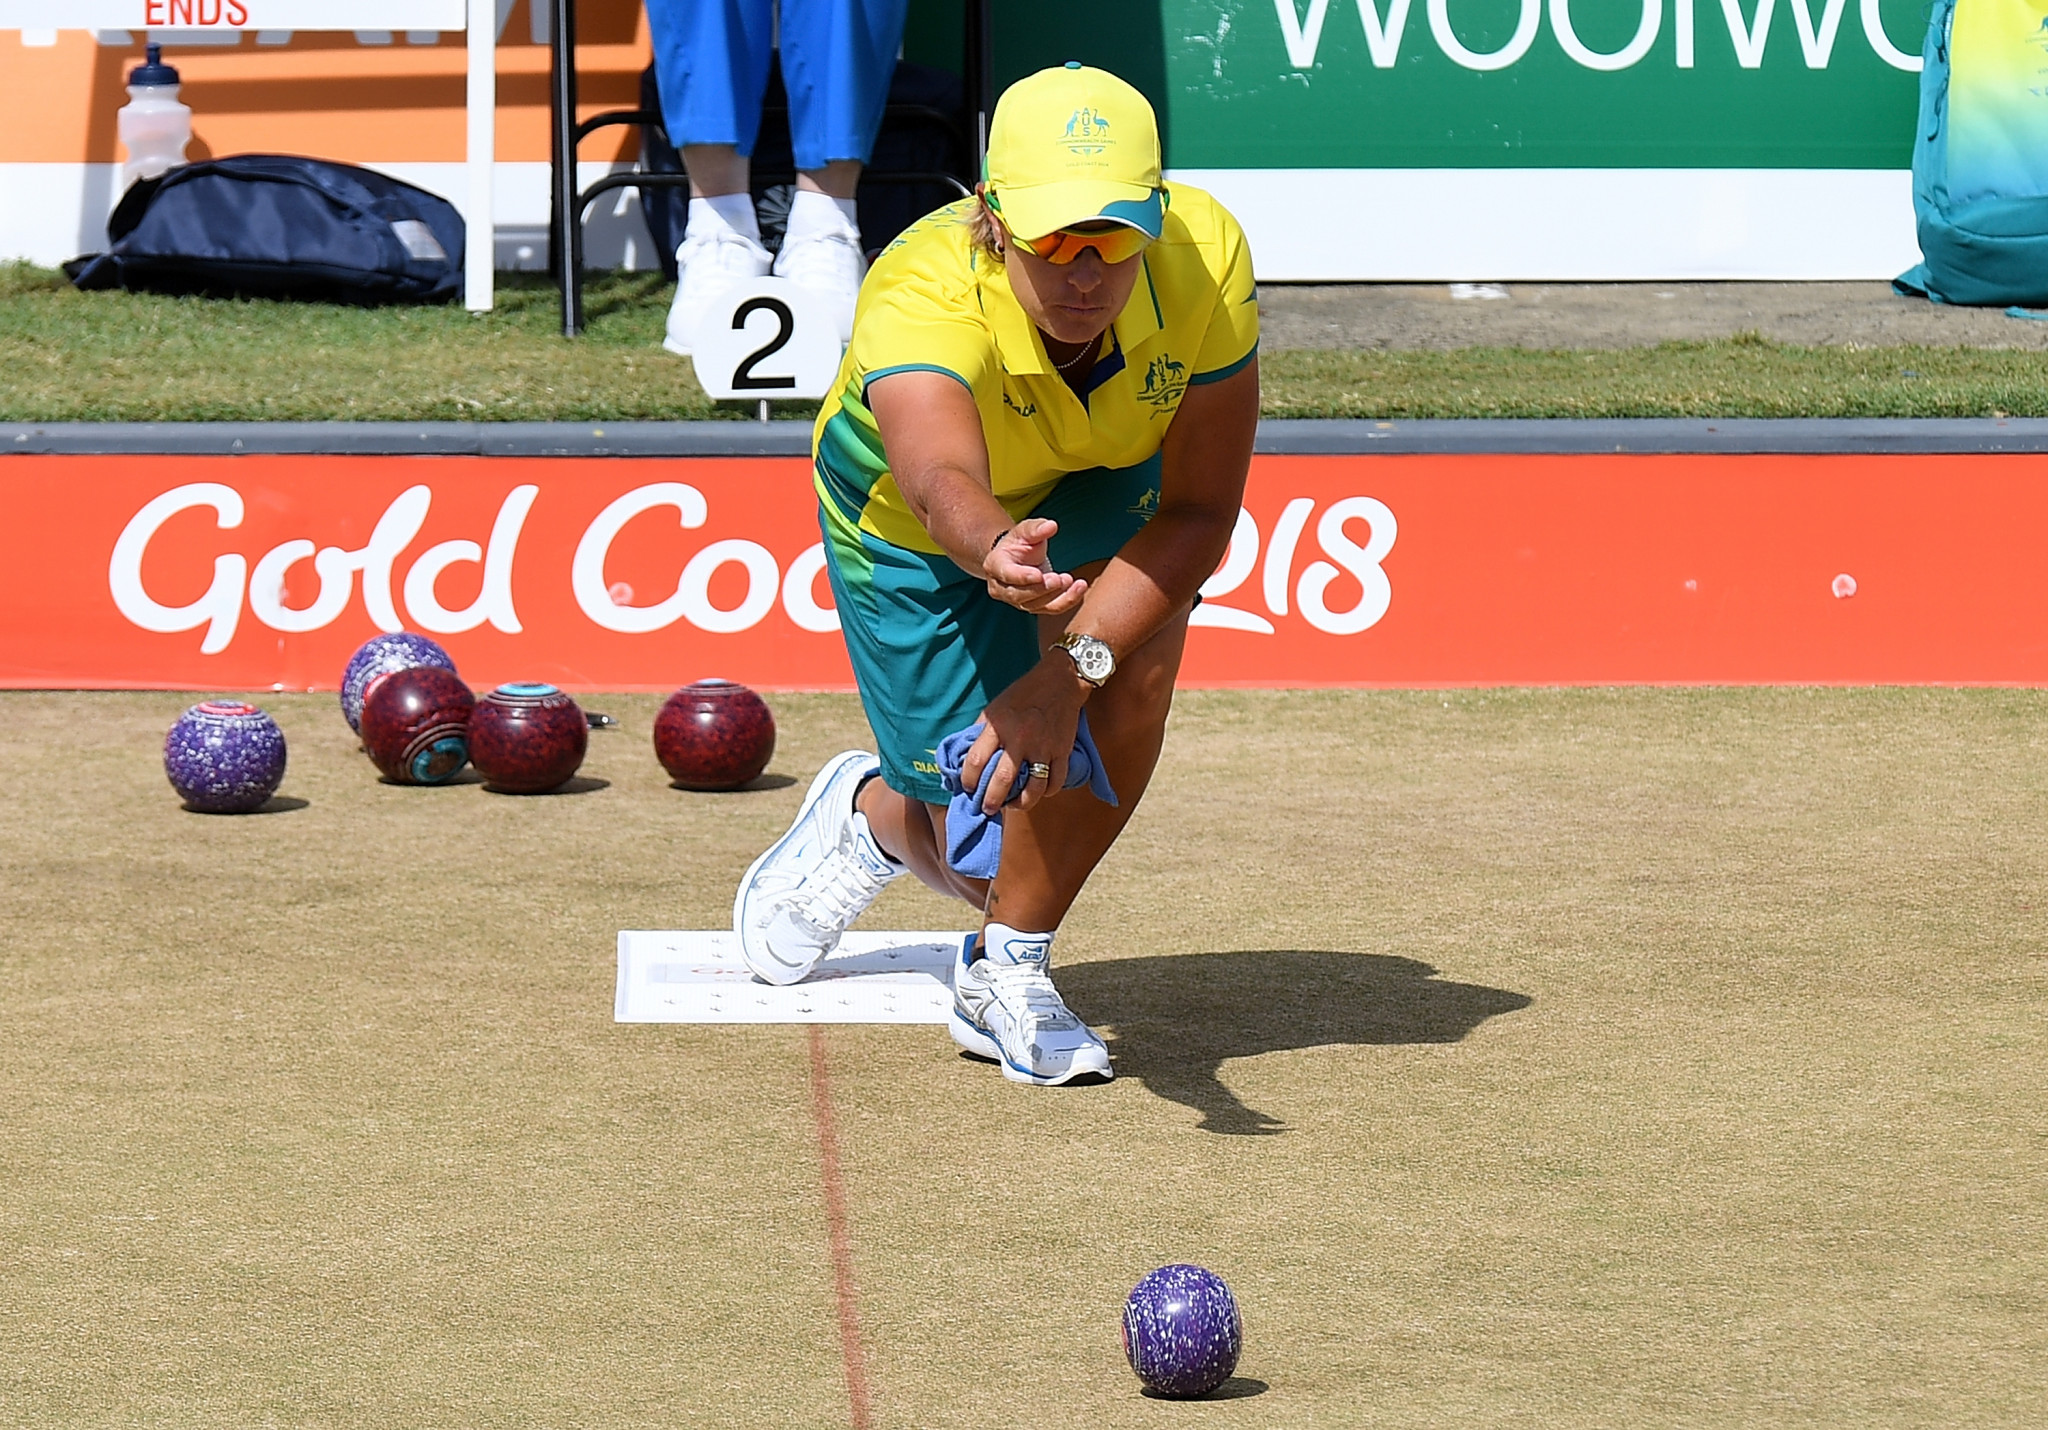 Gold Coast rubber-stamped as 2023 World Bowls Championships host